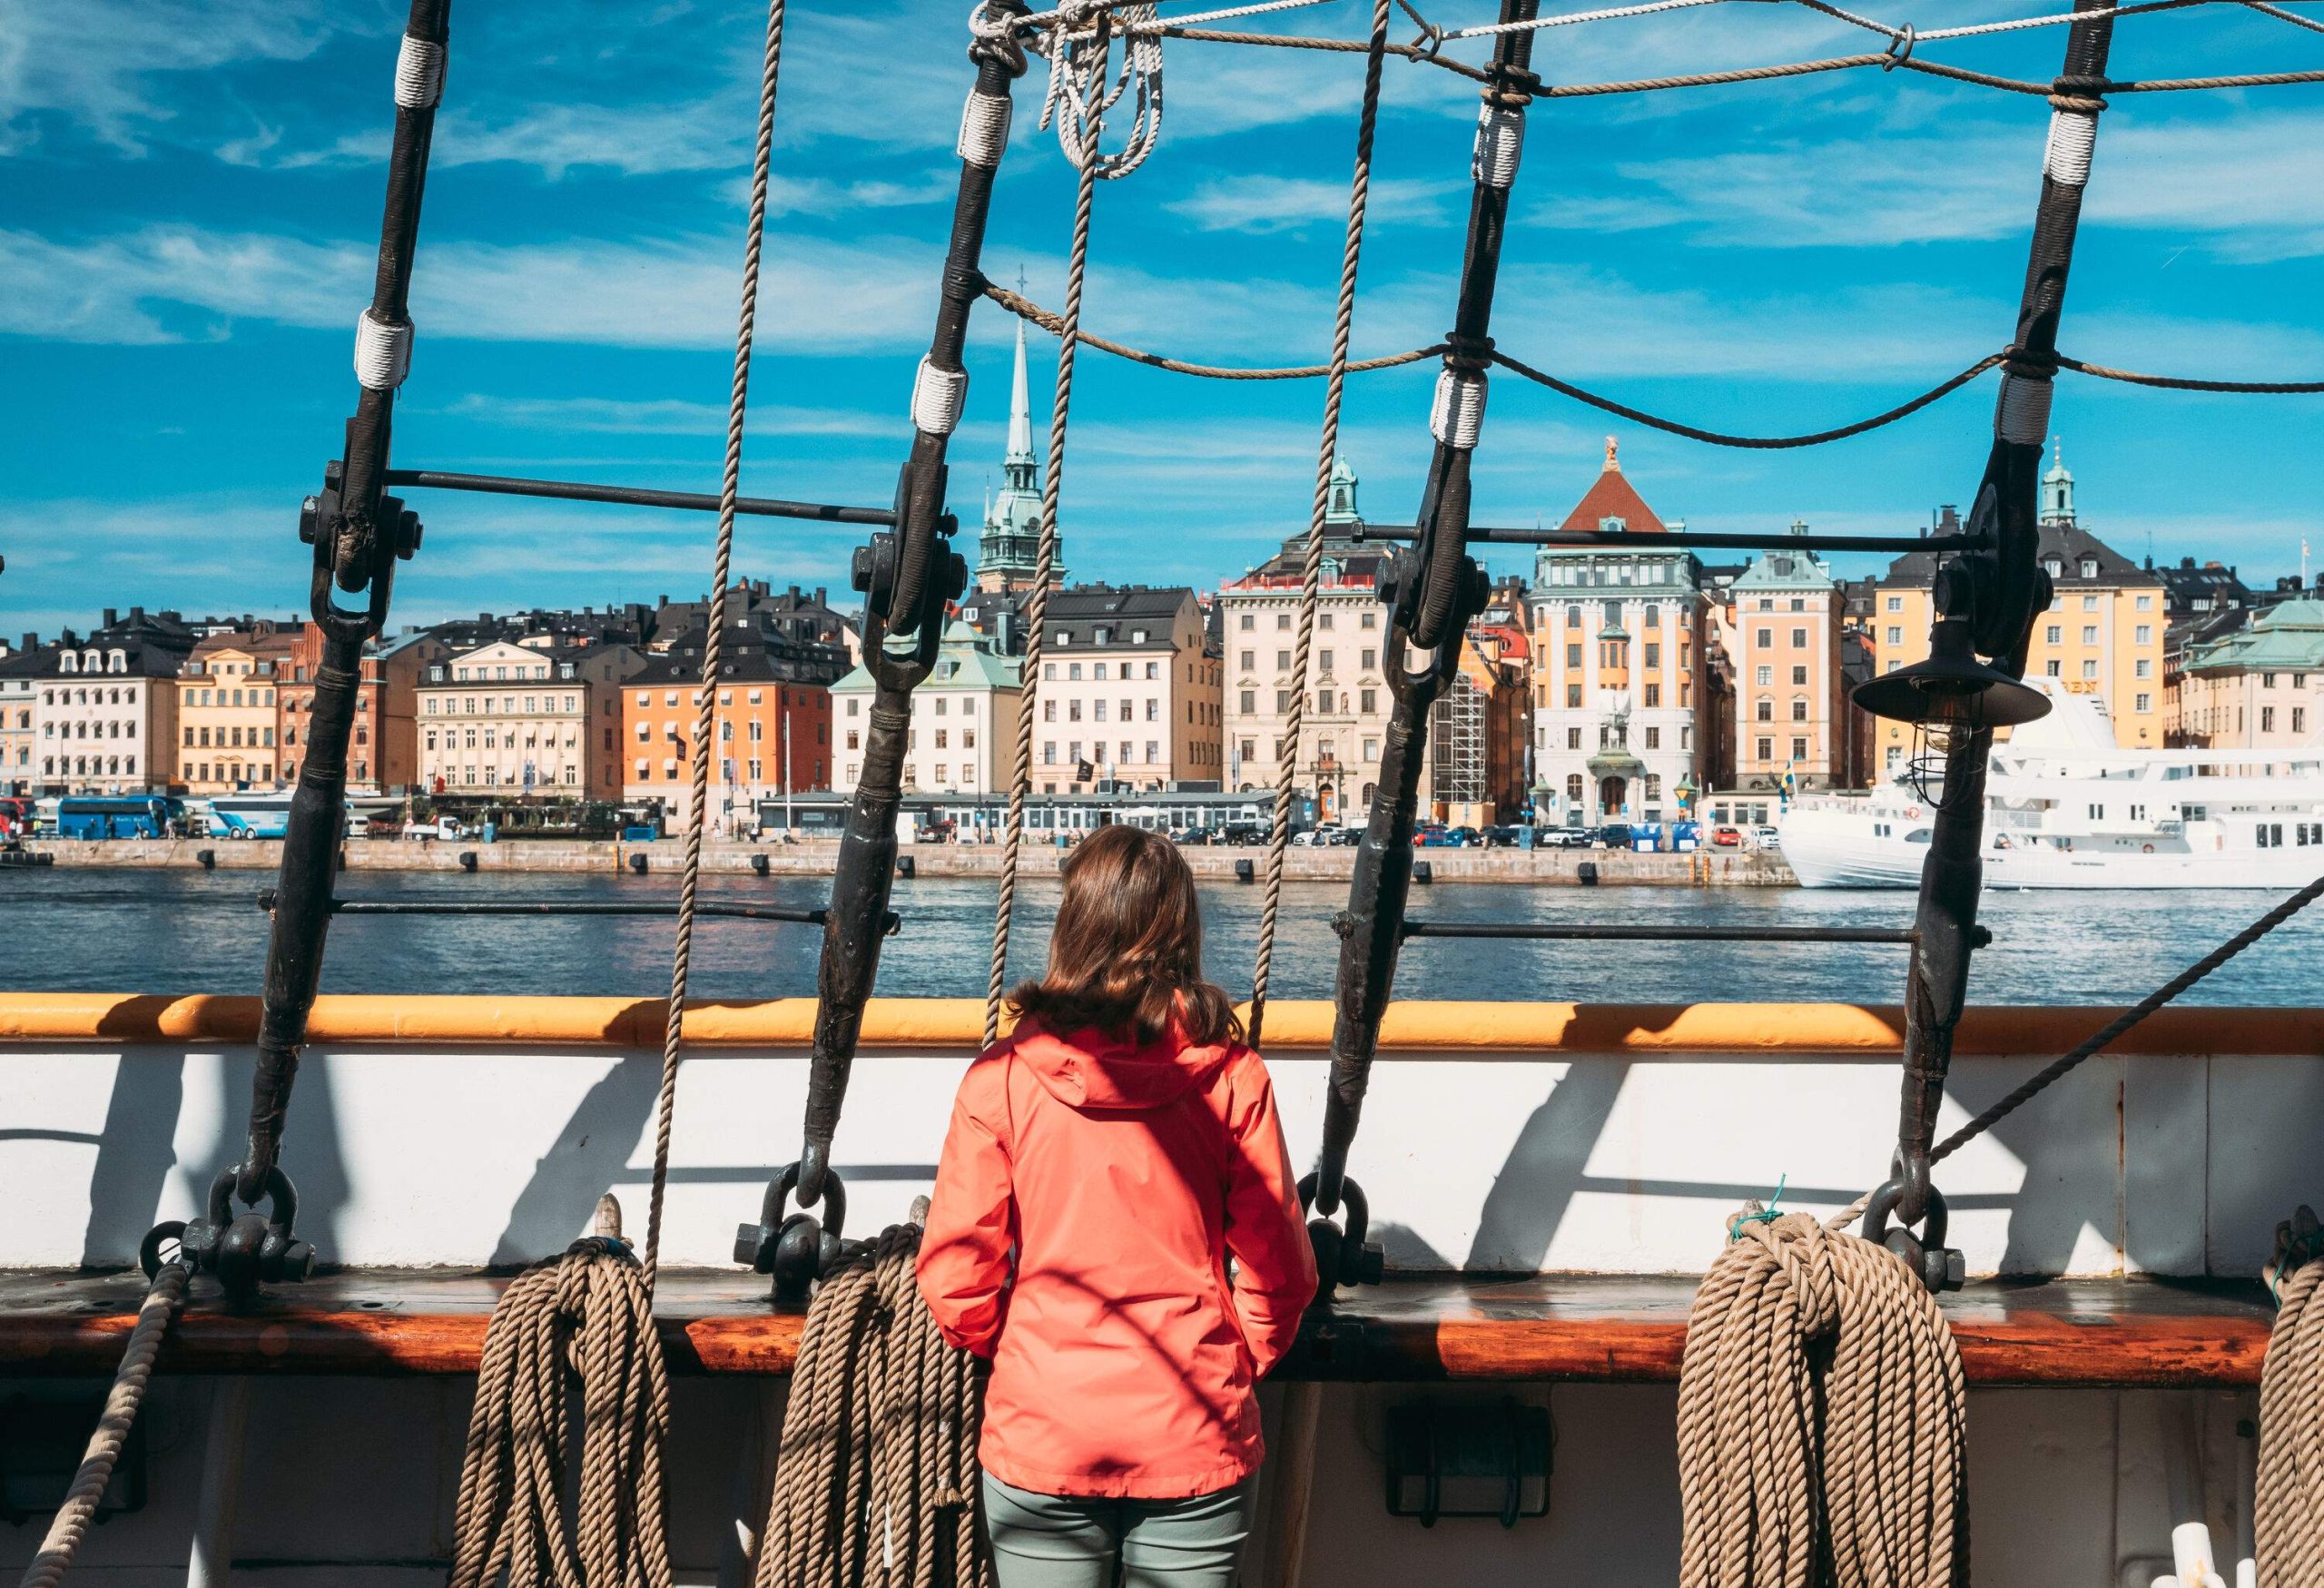 A person looks at the rows of classic and elegant buildings from a ship.